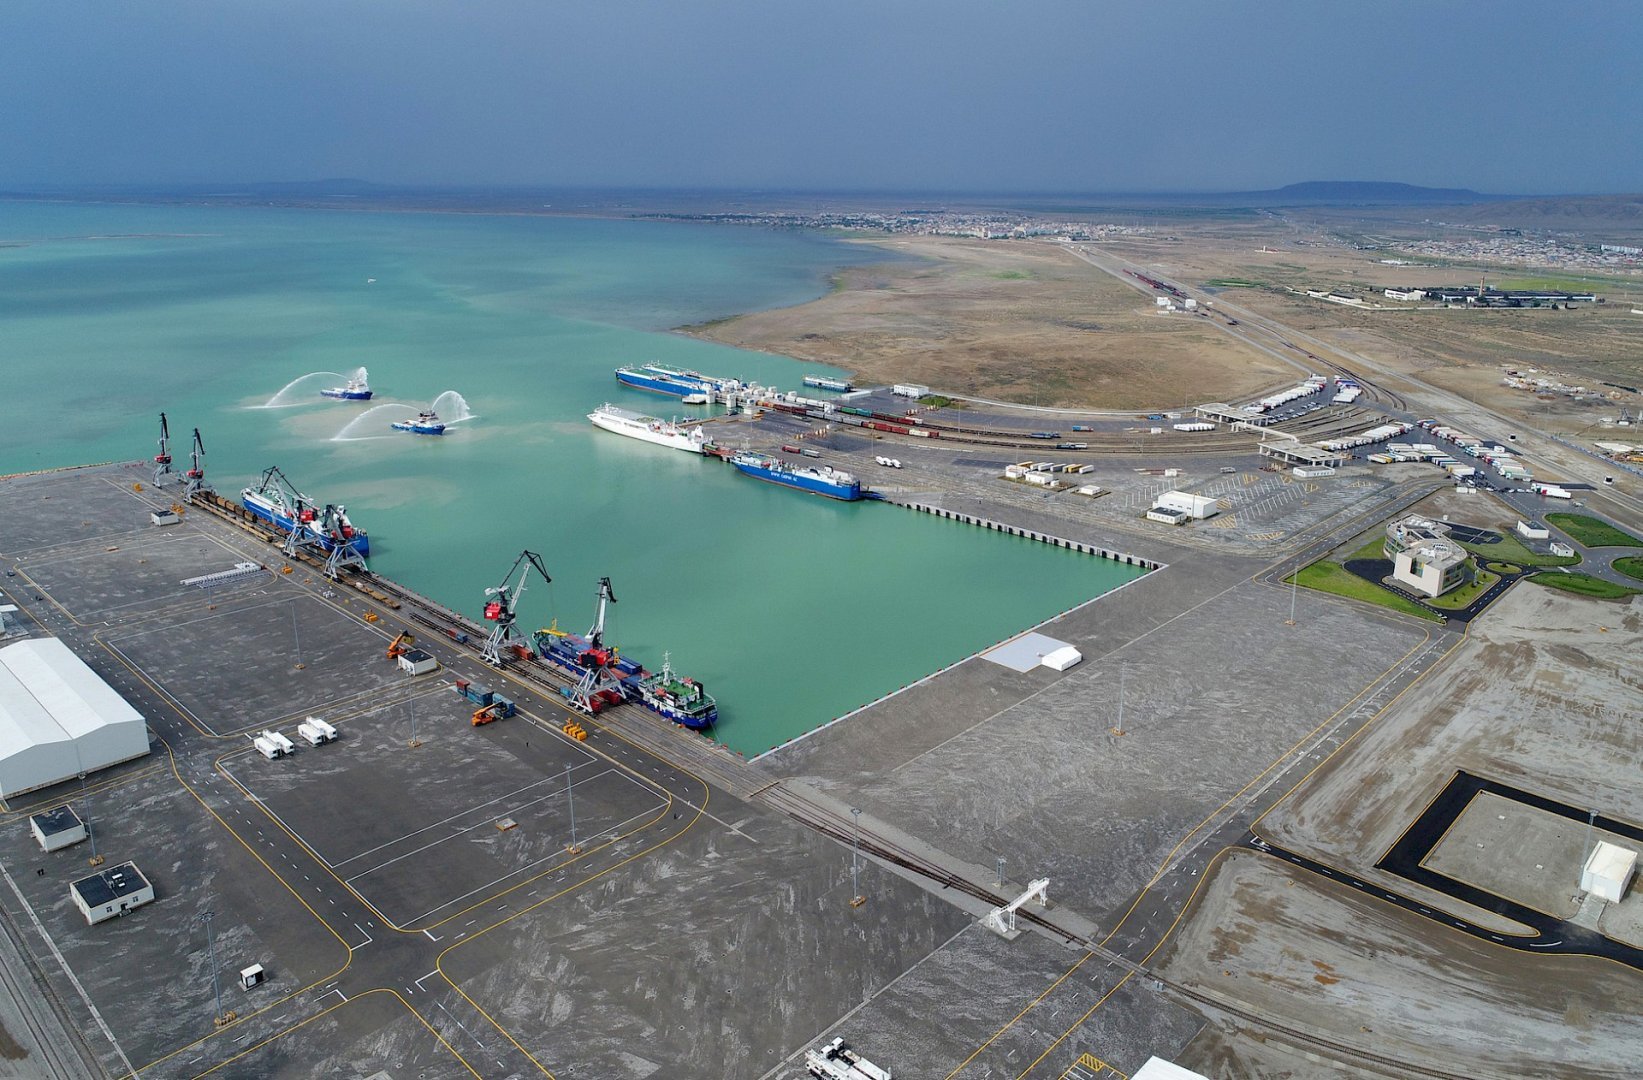 Azerbaijani Alat Port holds transit role for Central Asian countries - official